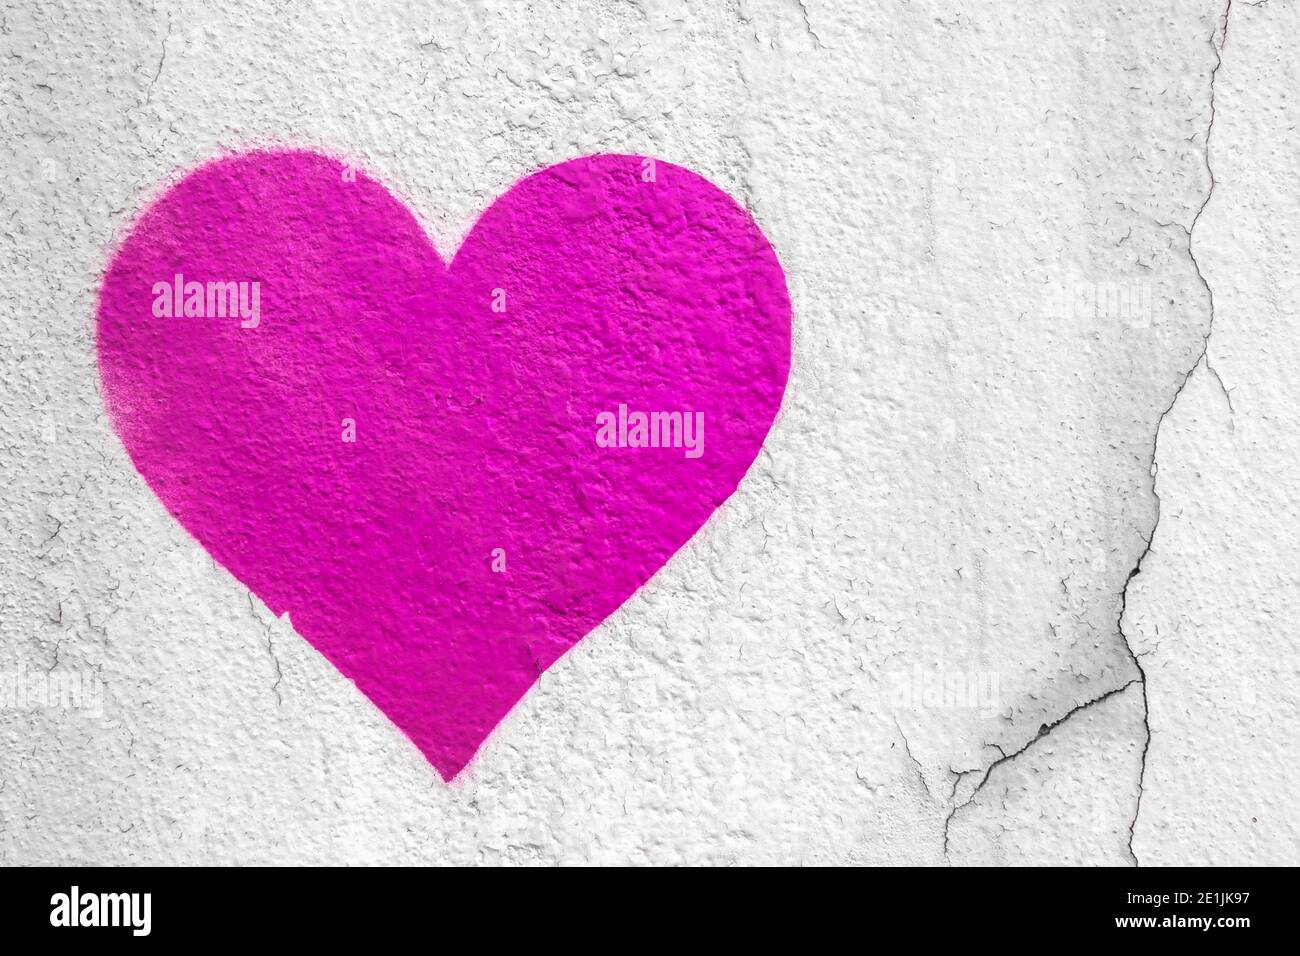 Pink love heart hand drawn on grungy wall. Textured background trendy street style. Stock Photo